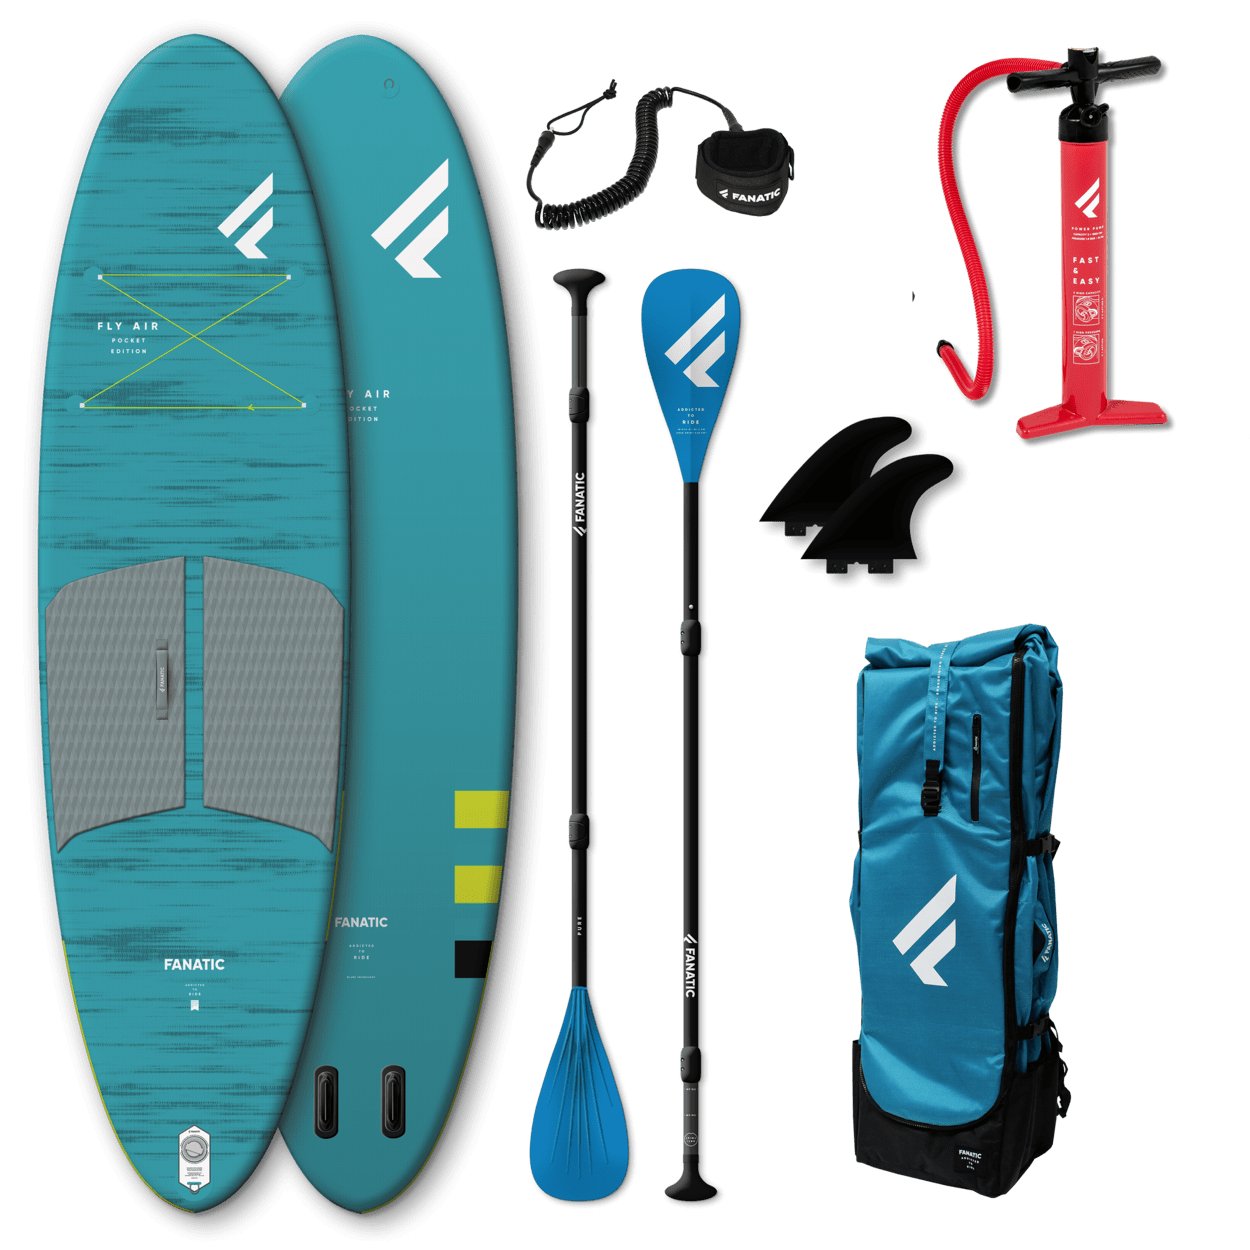 Fanatic Package Fly Air Pocket/Pure 2022 iSUP Paddleboard - Worthing Watersports - 9010583004617 - iSUP Packages - Fanatic SUP